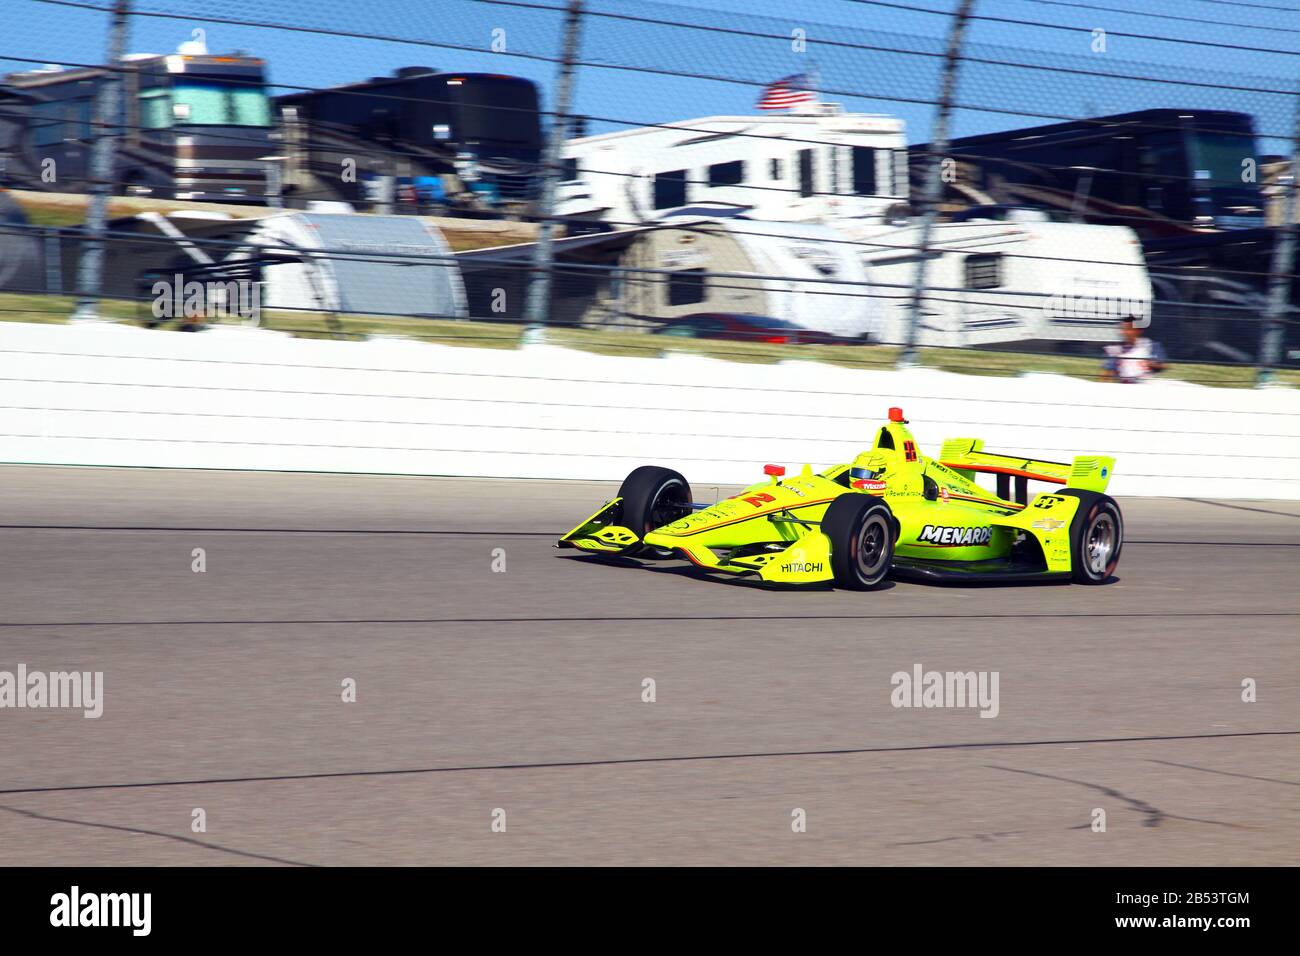 Newton Iowa, July 19, 2019: 22 Simon Pagenaud, France, Team Penske, on race track during practice session for the Iowa 300 Indycar race. Stock Photo